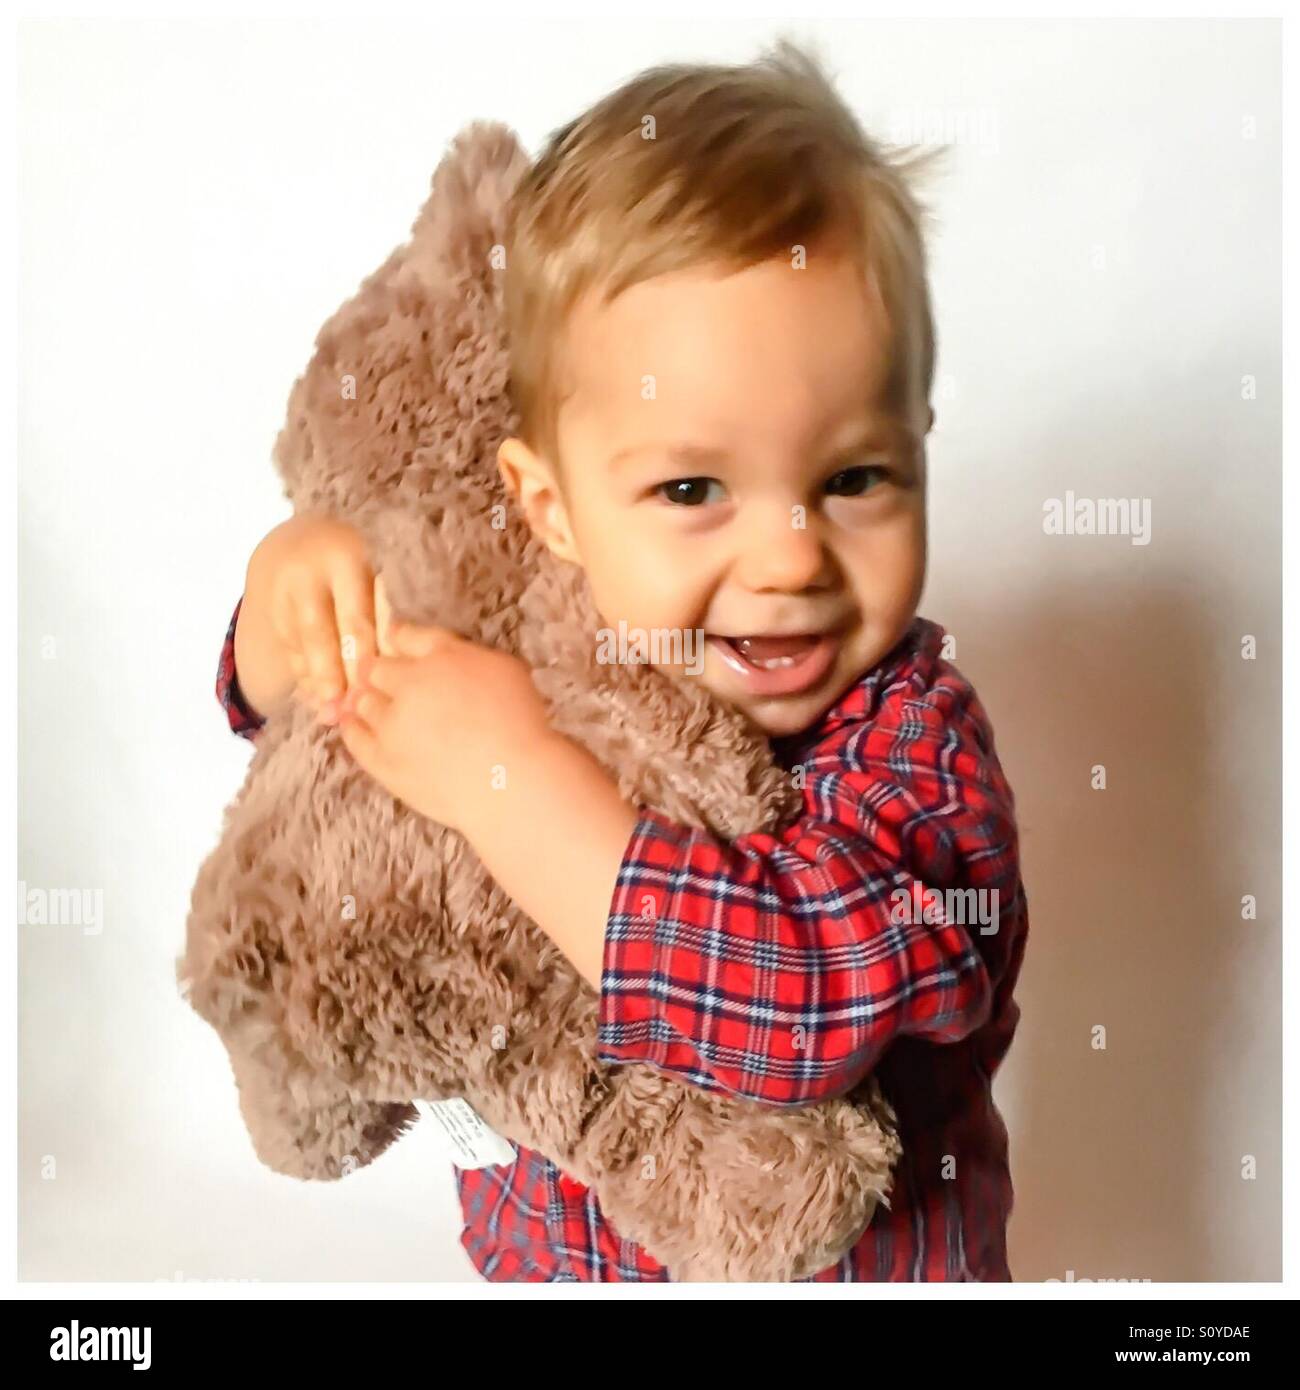 15 months old baby boy wearing red pajamas, smiling and hugging his stuffed teddy bear Stock Photo